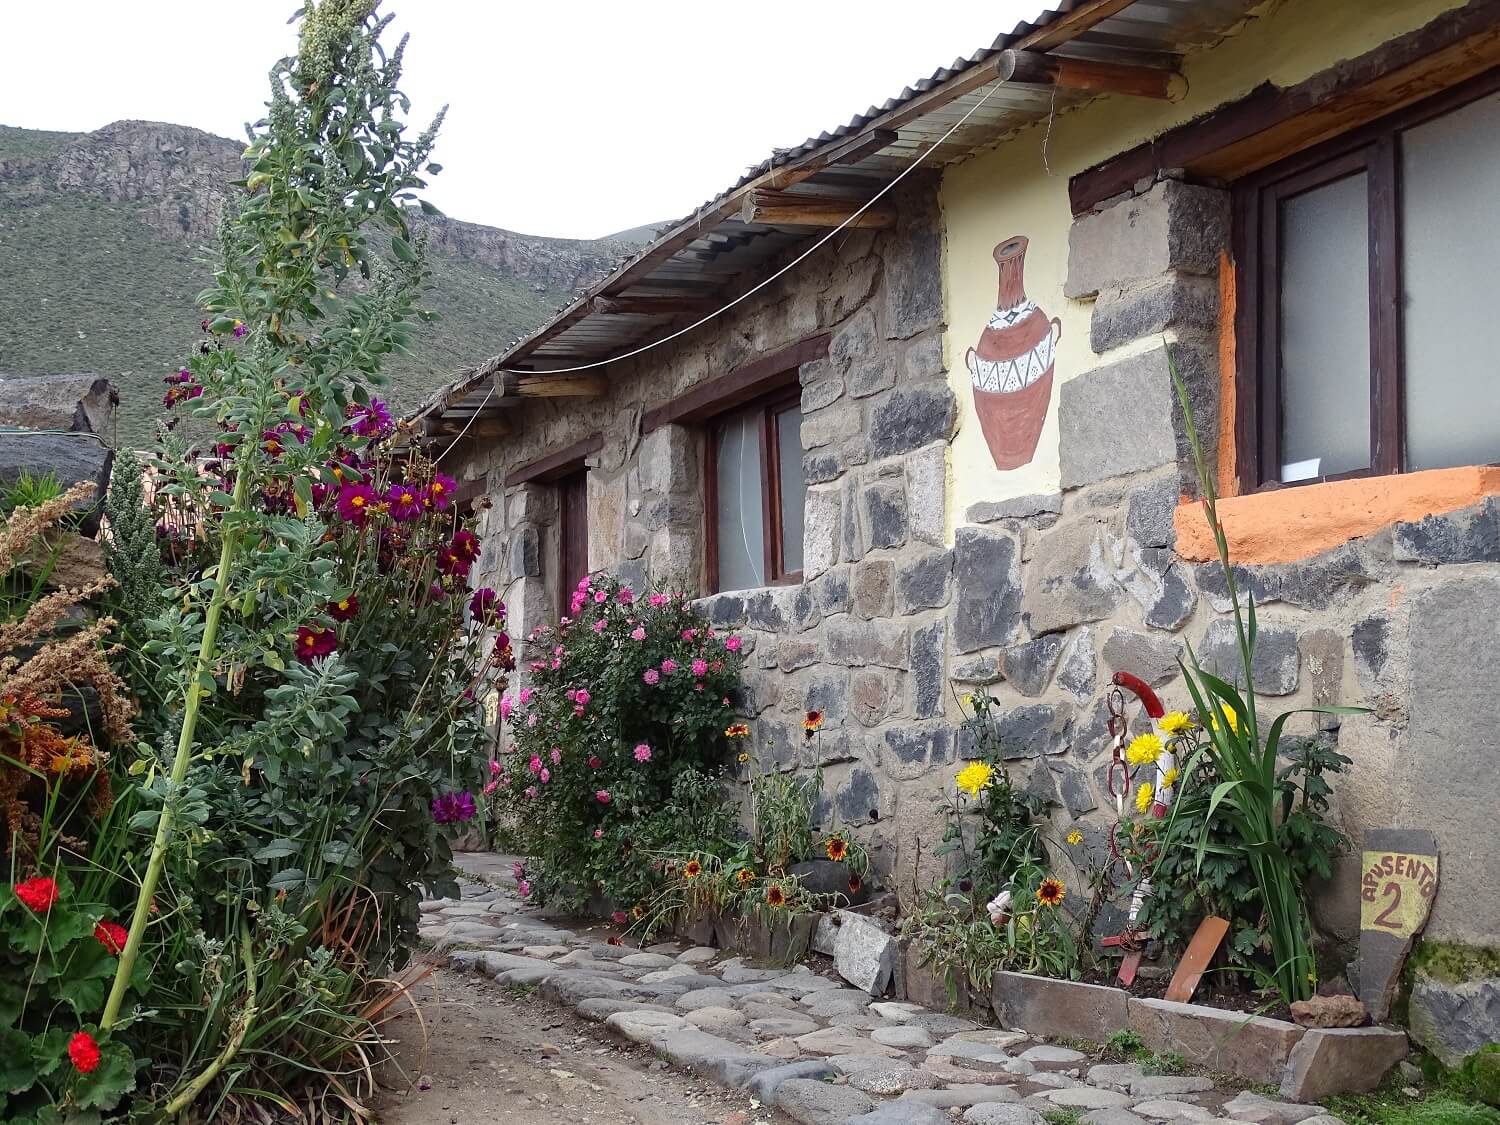 11Local homestay in the Colca Canyon. Community-Based tourism in Coporaque, Colca Canyon, Peru | RESPONSible Travel Peru